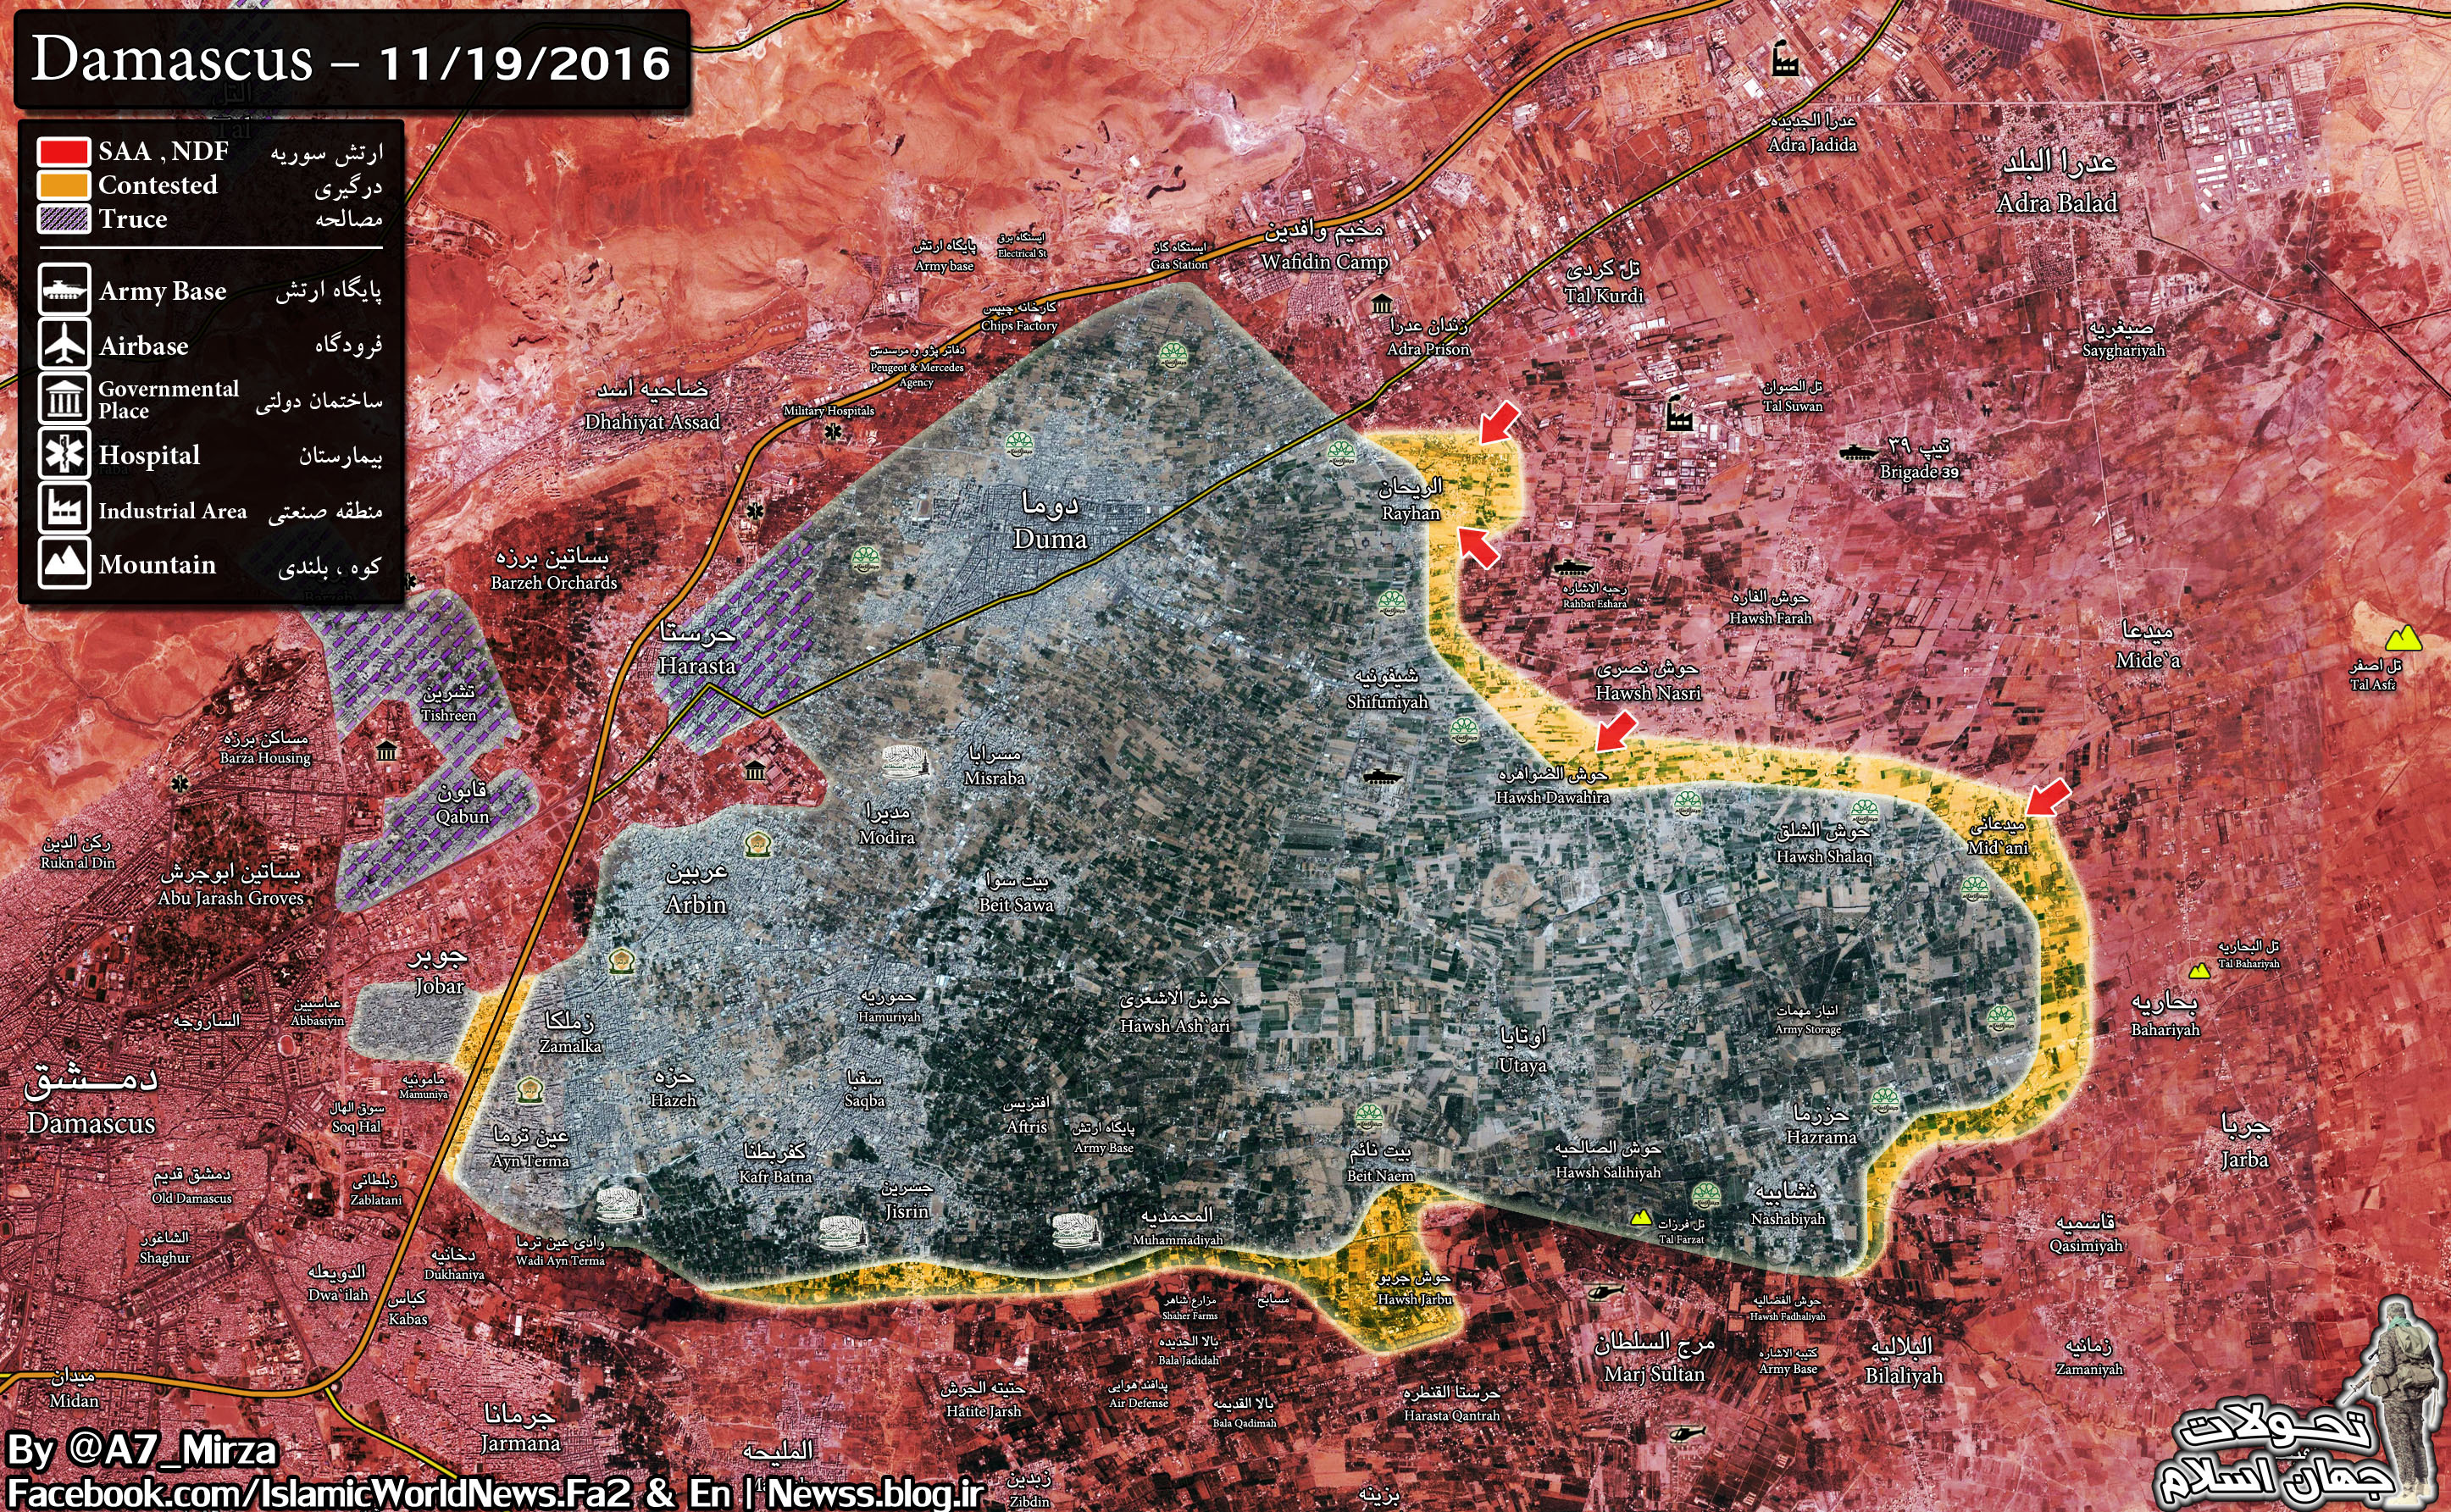 Military Situation in Eastern Ghouta Region near Damascus on November 19, 2016